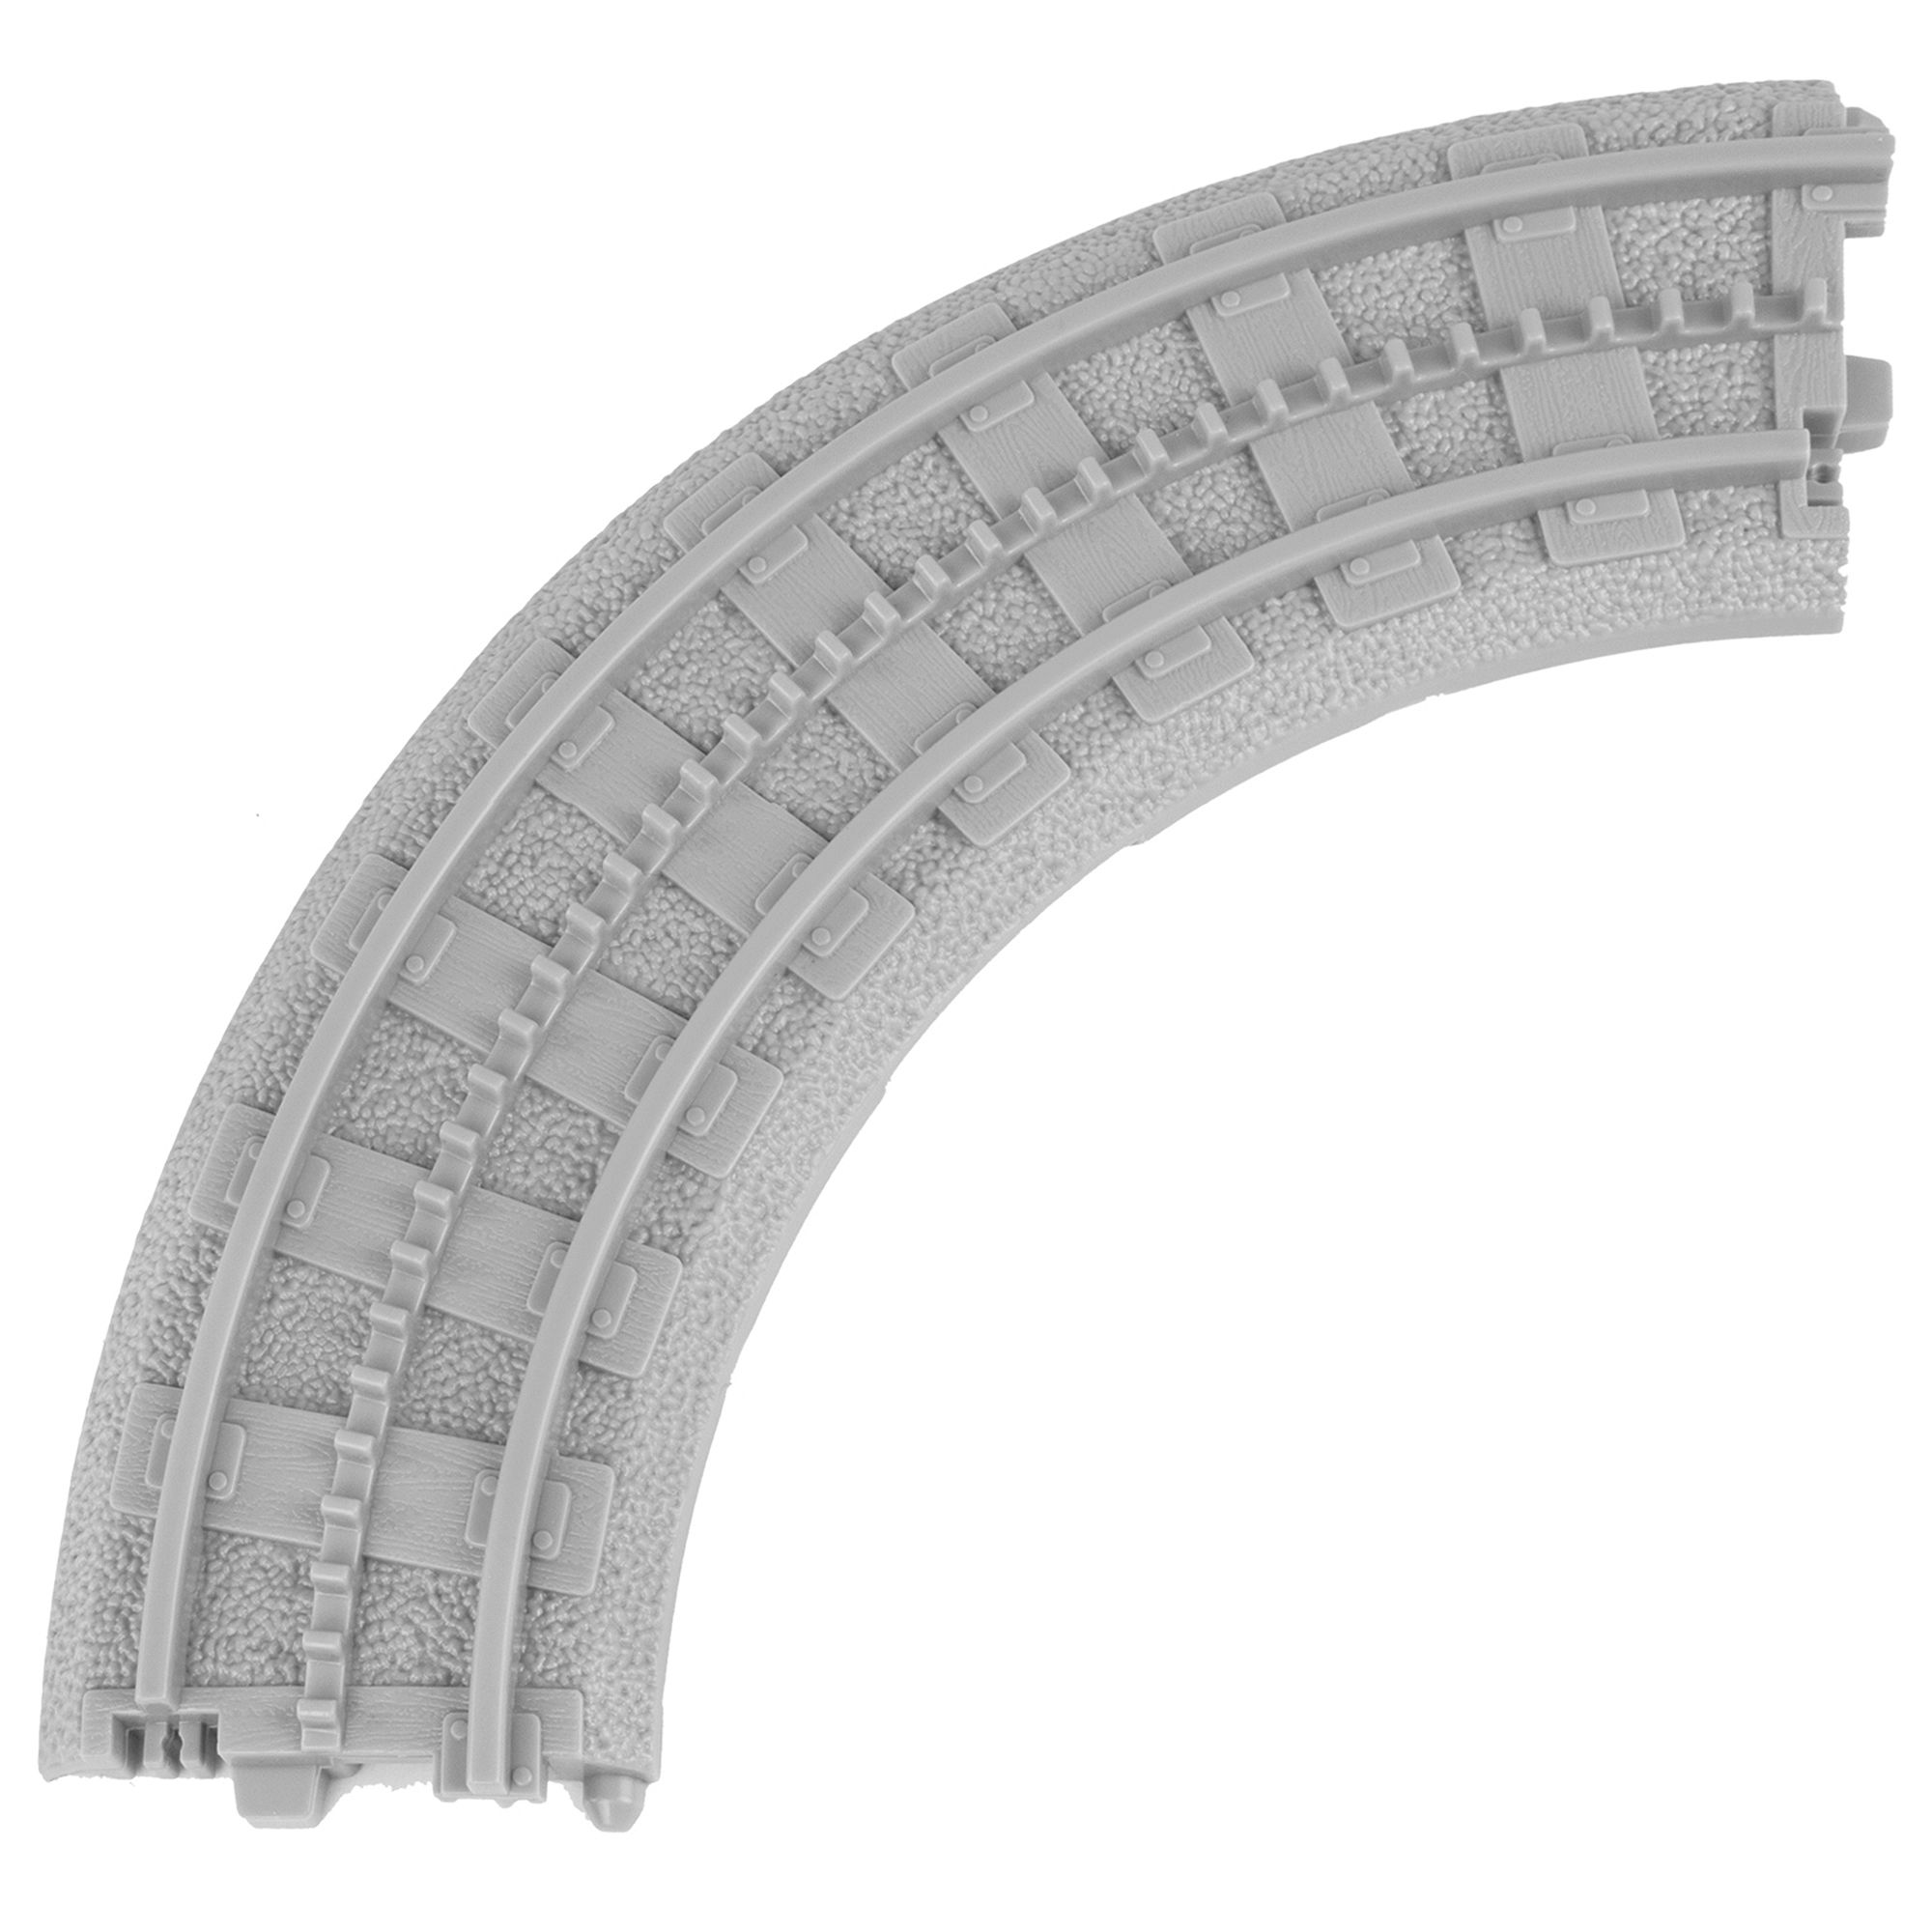 UPC 023922116055 product image for Lionel 6-pk Imagineering Curved Track | upcitemdb.com